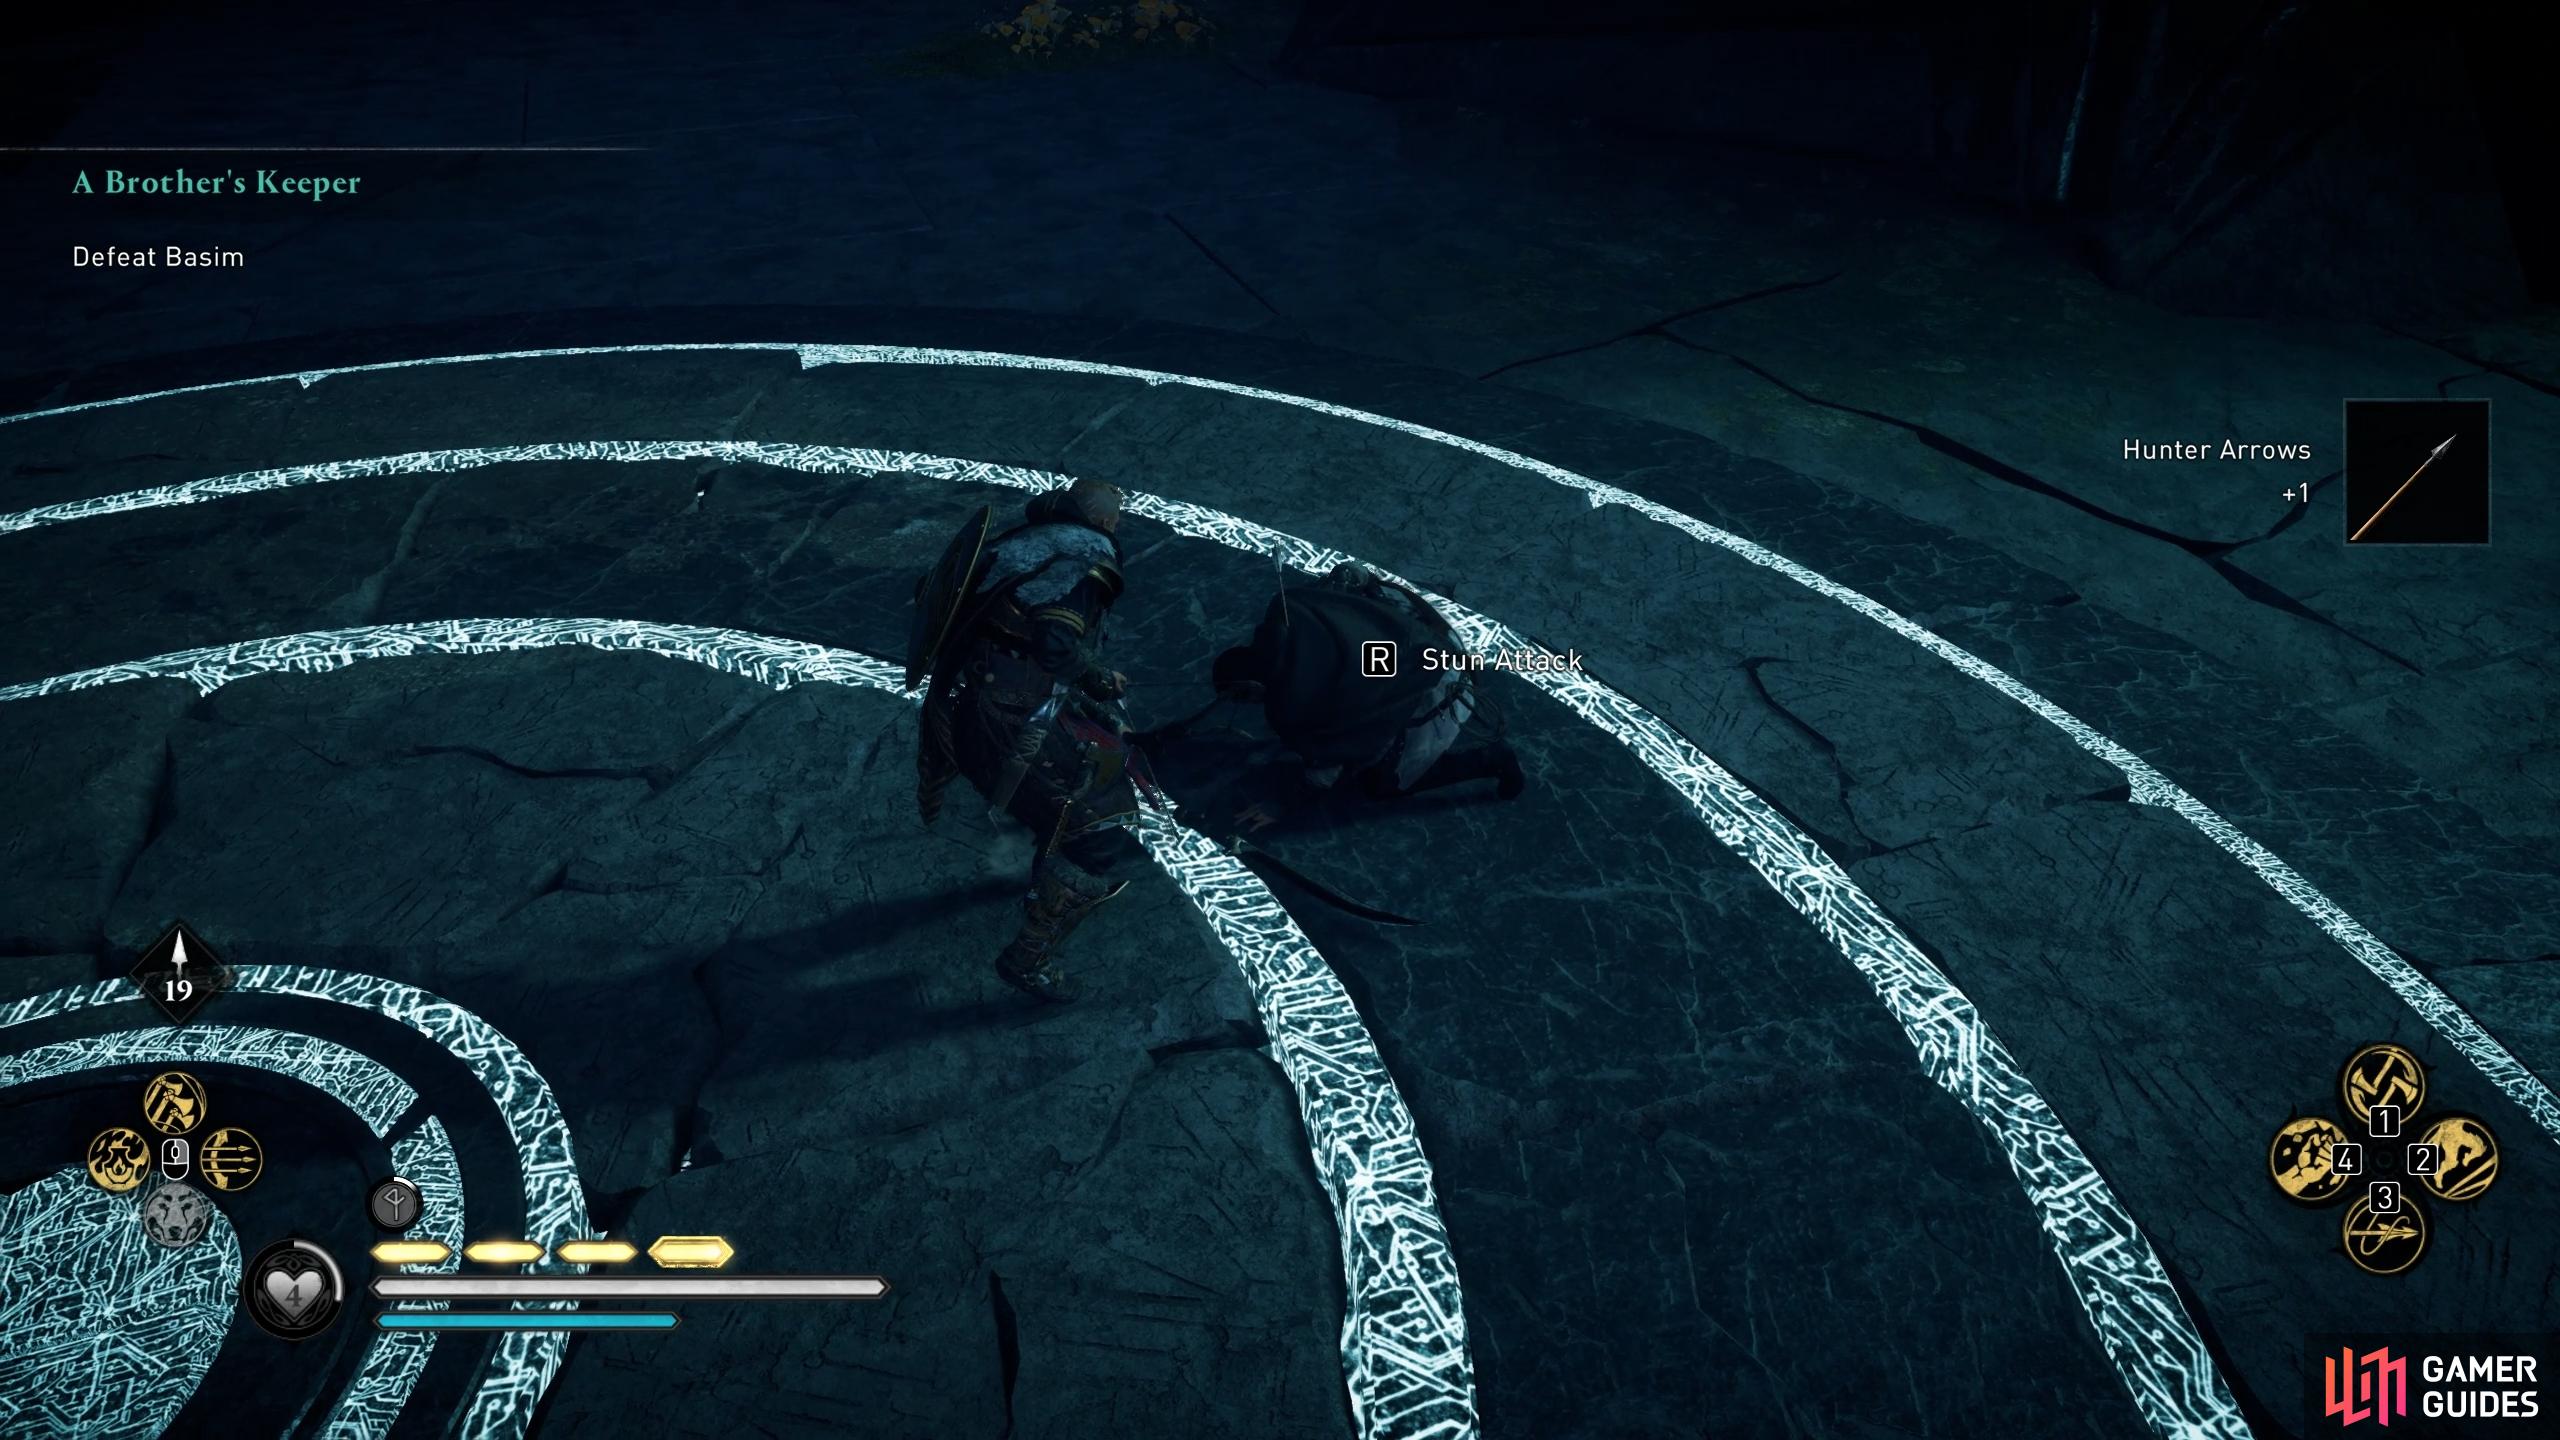 Execute a stun attack as soon as possible to end the fight.